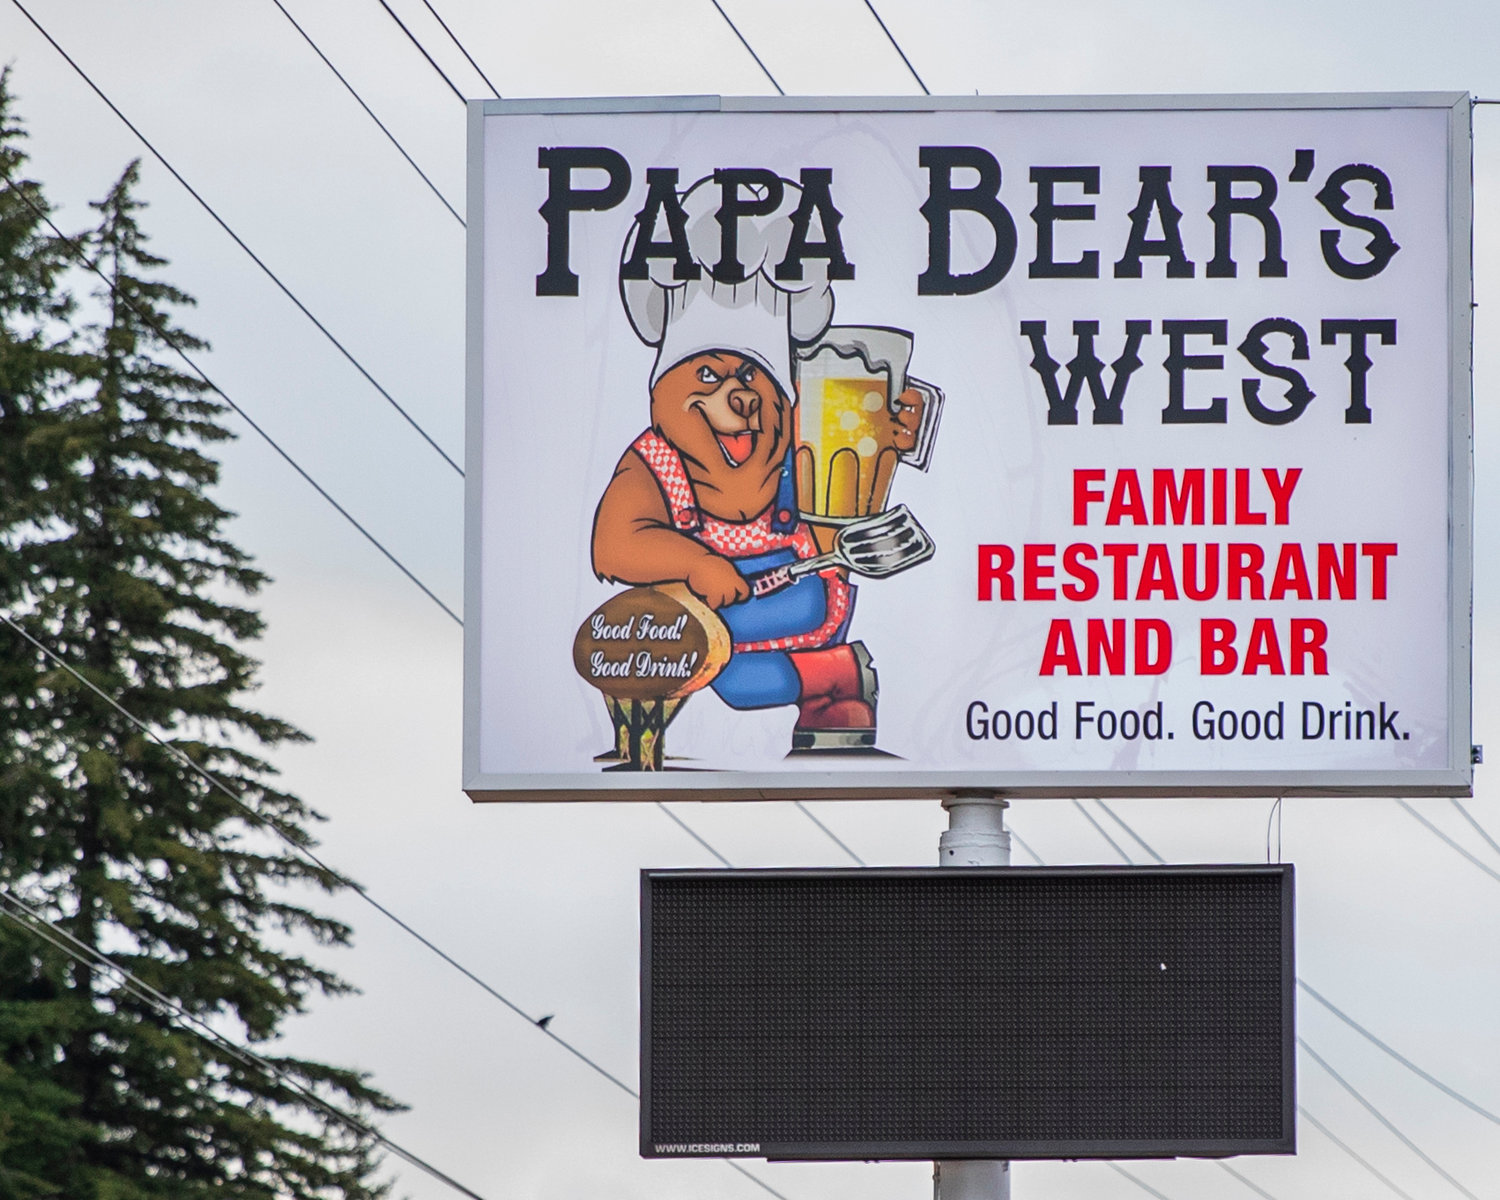 A billboard for Papa Bears West sits on display off U.S. Highway 12.